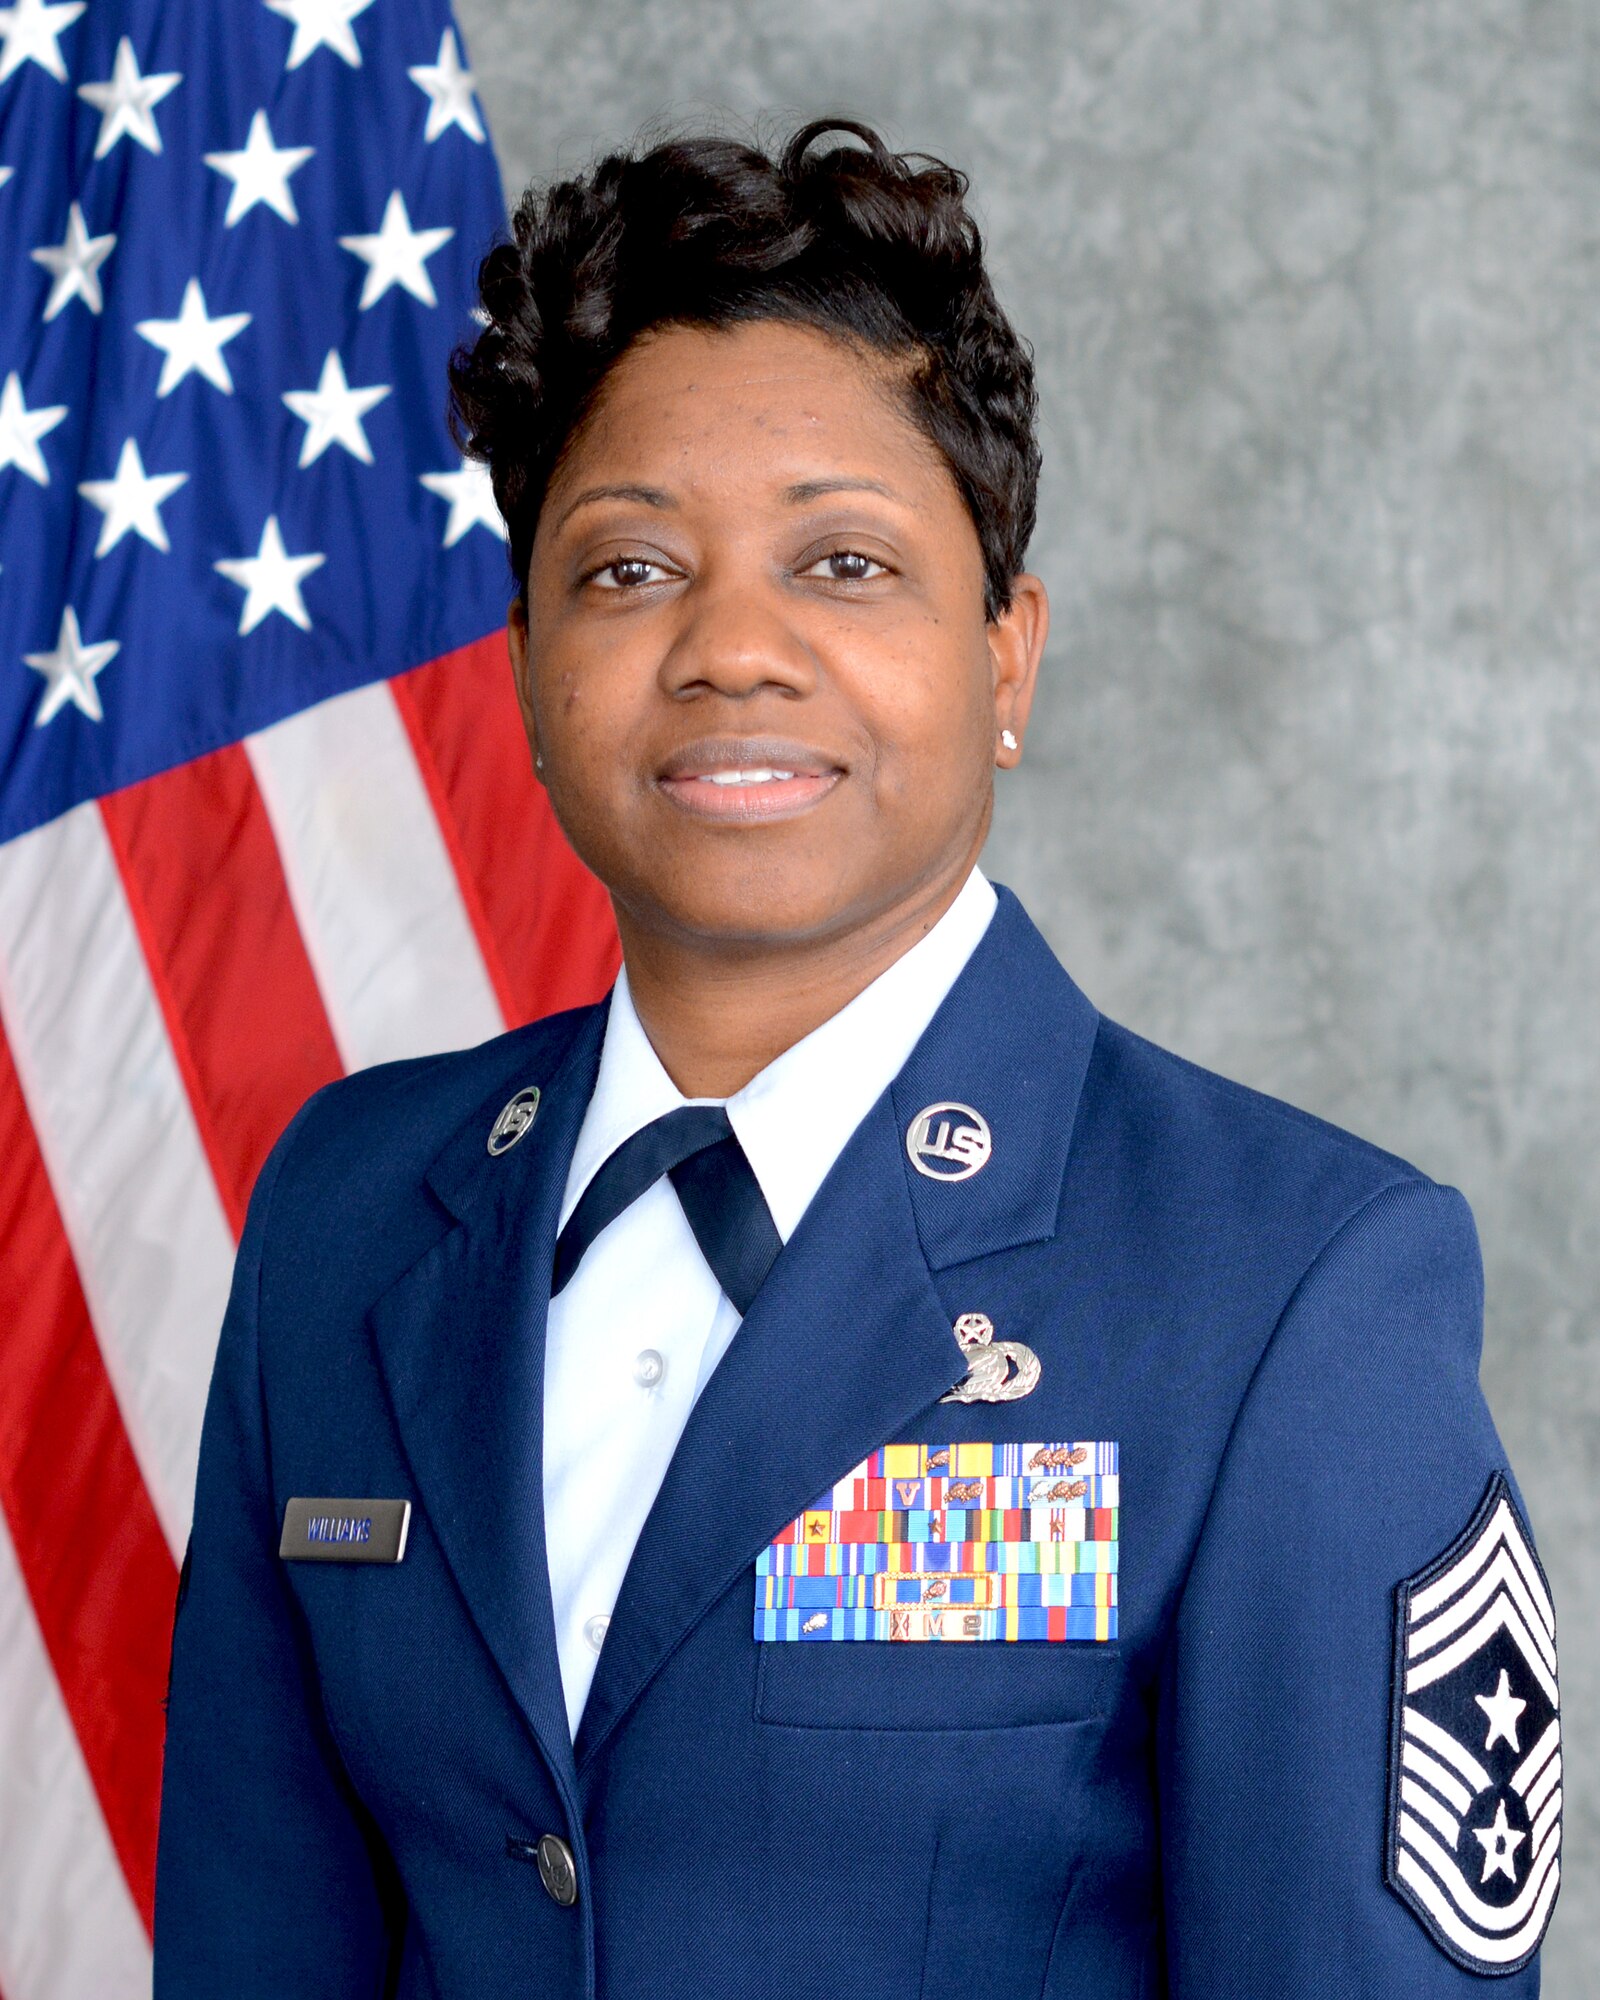 Chief Master Sgt. Takesha Williams, 931st Air Refueling Wing command chief, poses for a photo Jan. 24, 2019, at Tinker Air Force Base, Oklahoma. Williams is the first female African American Airman to serve as the command chief of the 931st ARW. (U.S. Air Force photo by Tech. Sgt. Samantha Mathison)